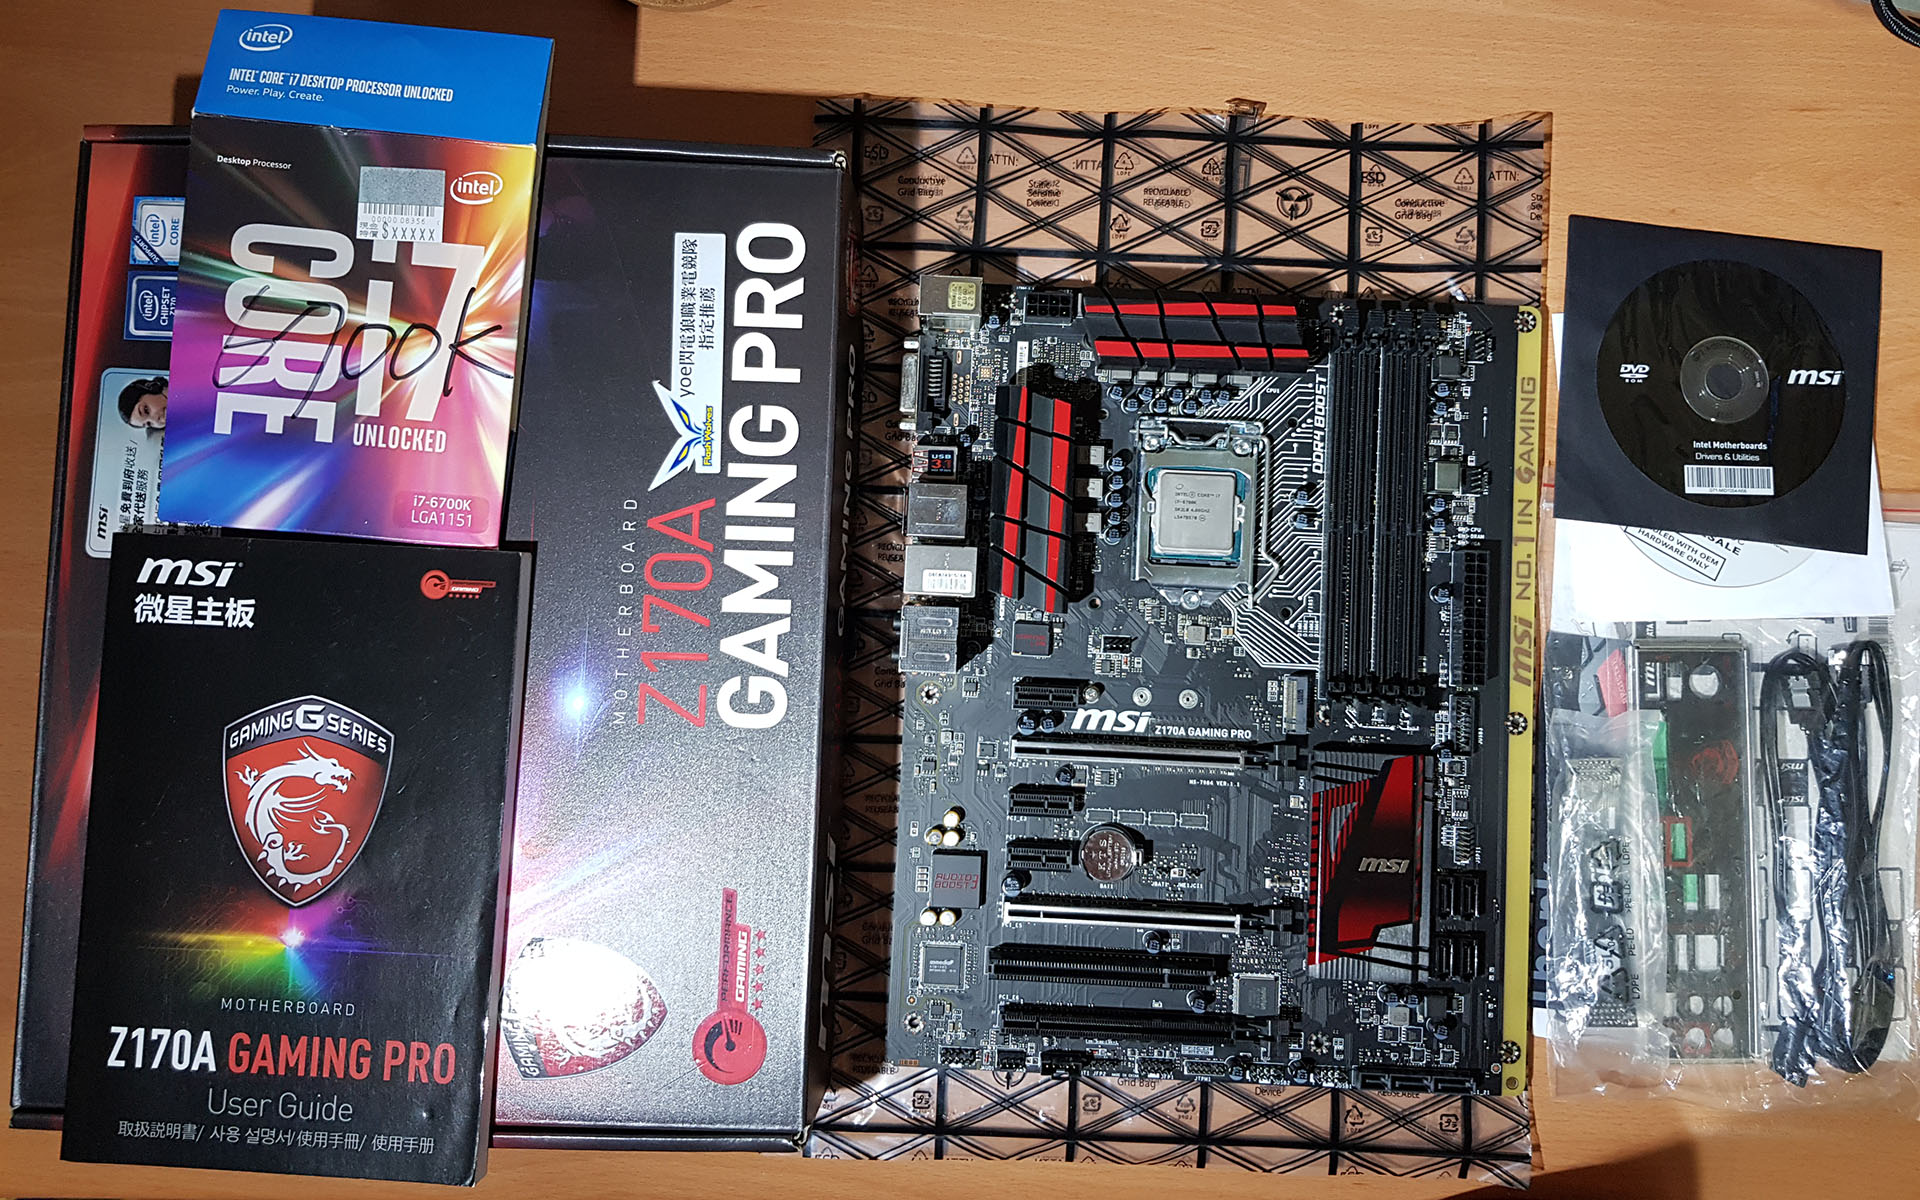 Mobo cpu and parts.jpg